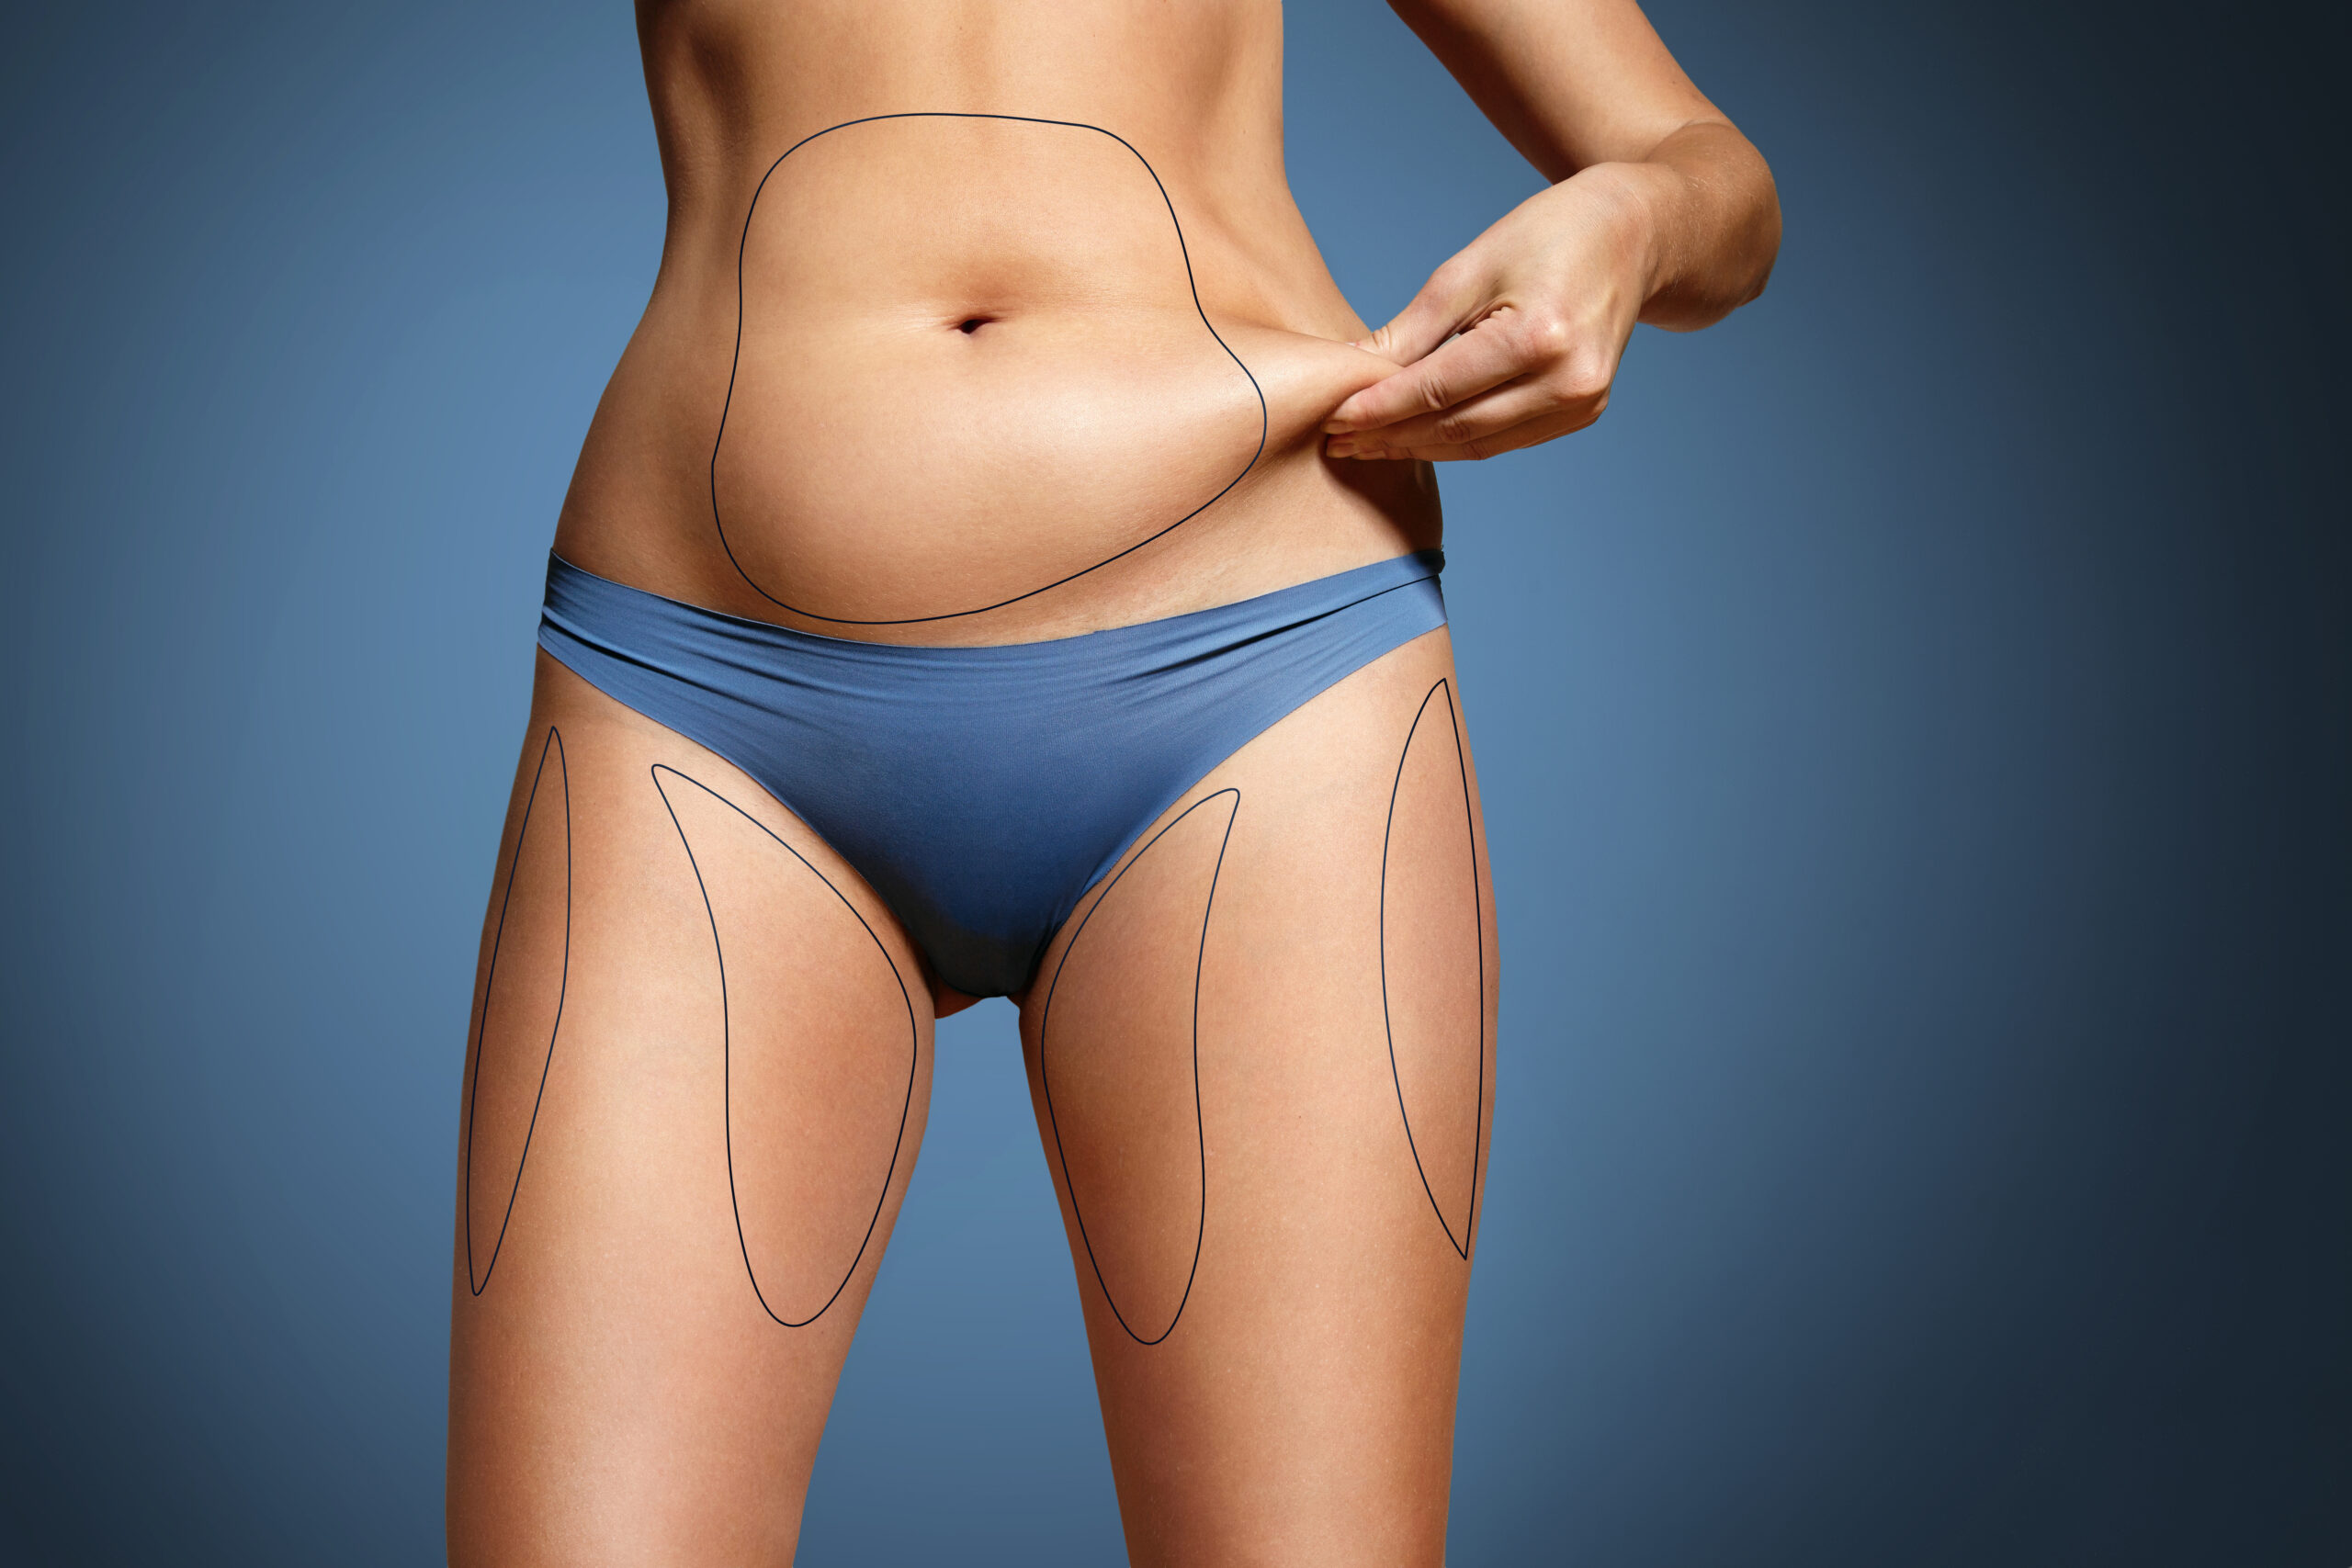 CoolSculpting vs. liposuction: Differences, effects, and more